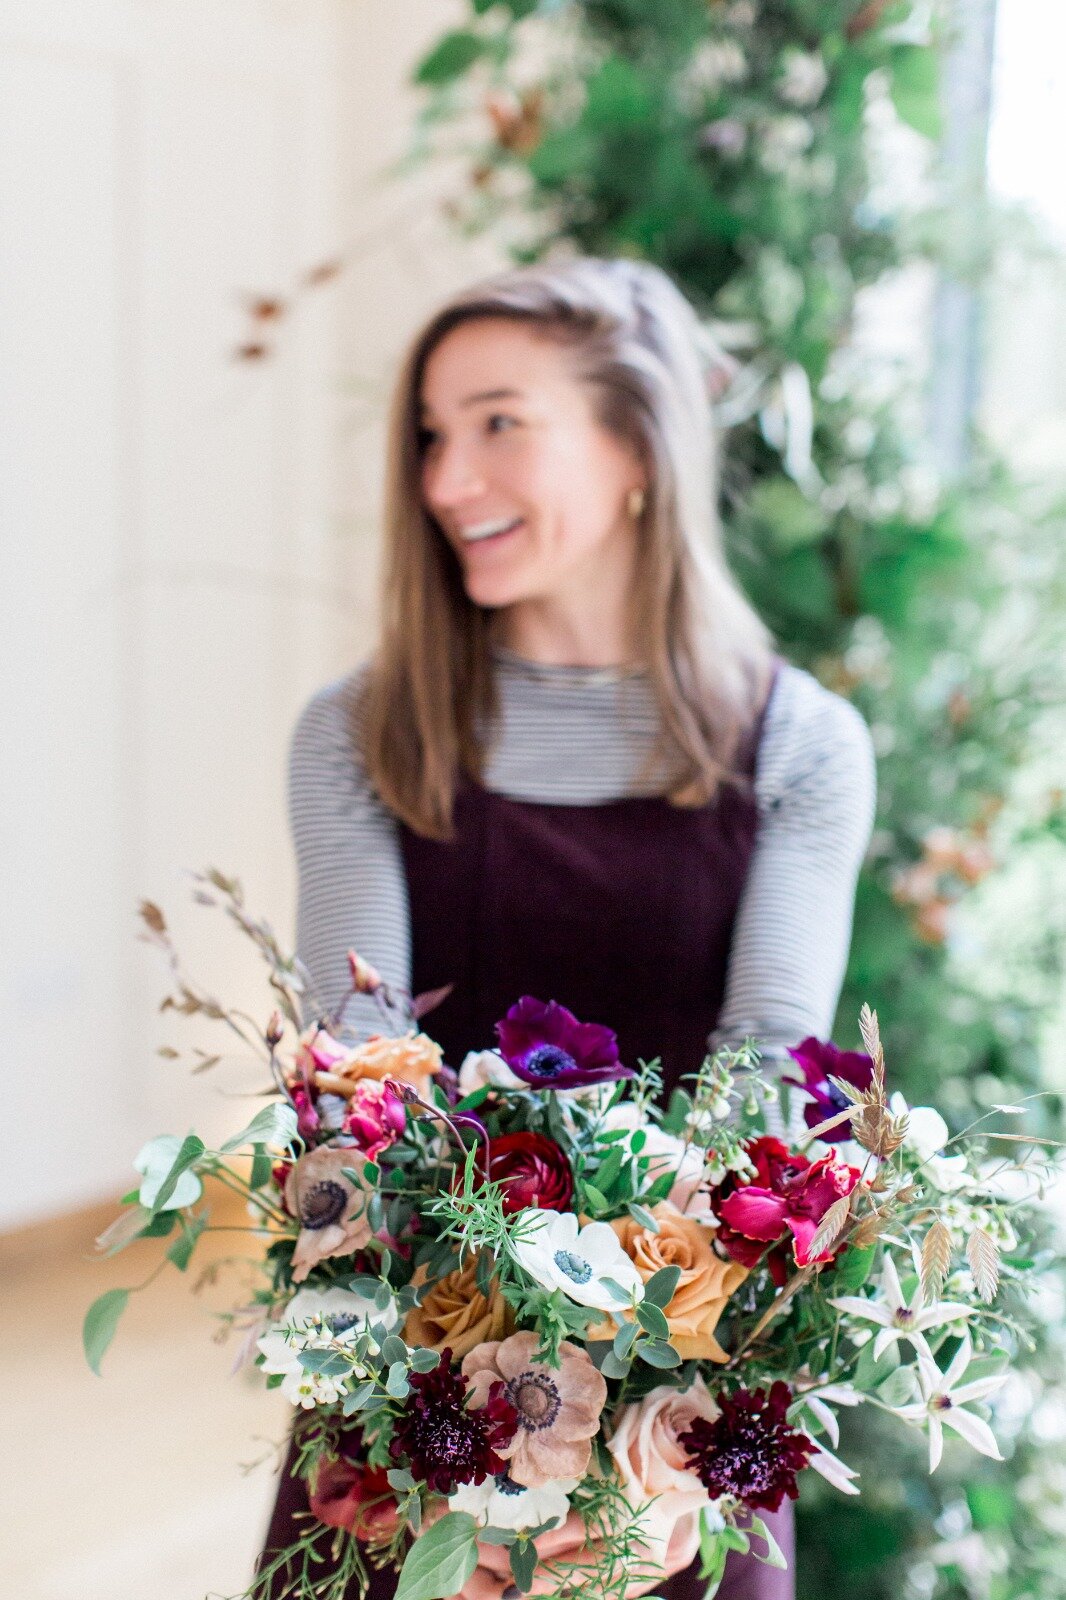 Poppy holding a bouquet she made. Photo: Phillipa Sian Photography